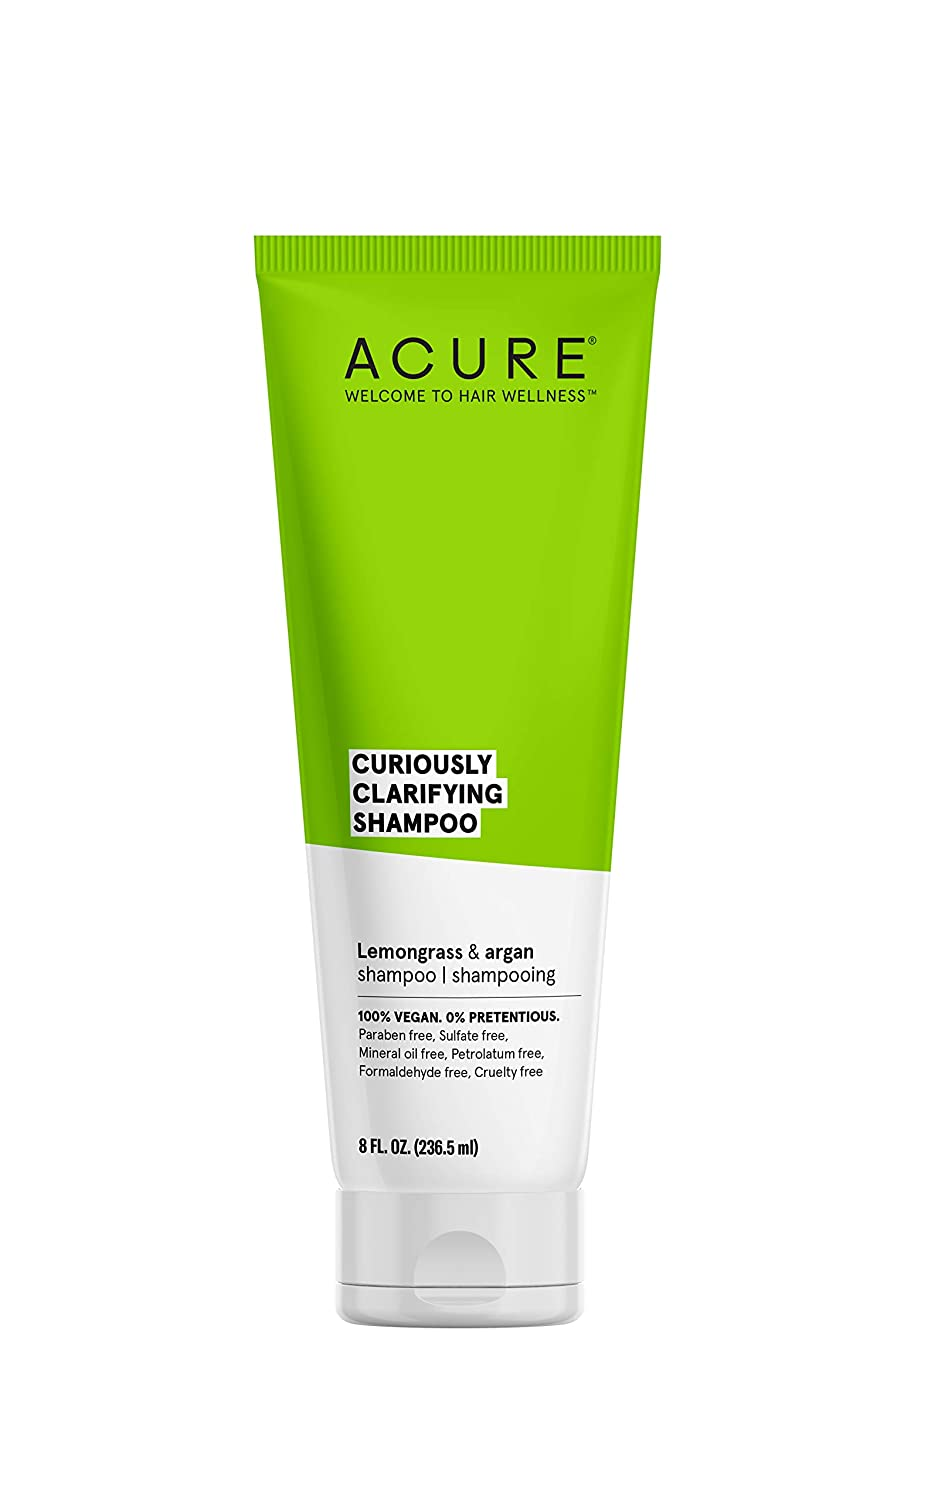 Acure shampoo $4.44 (or less) with S&S $4.44